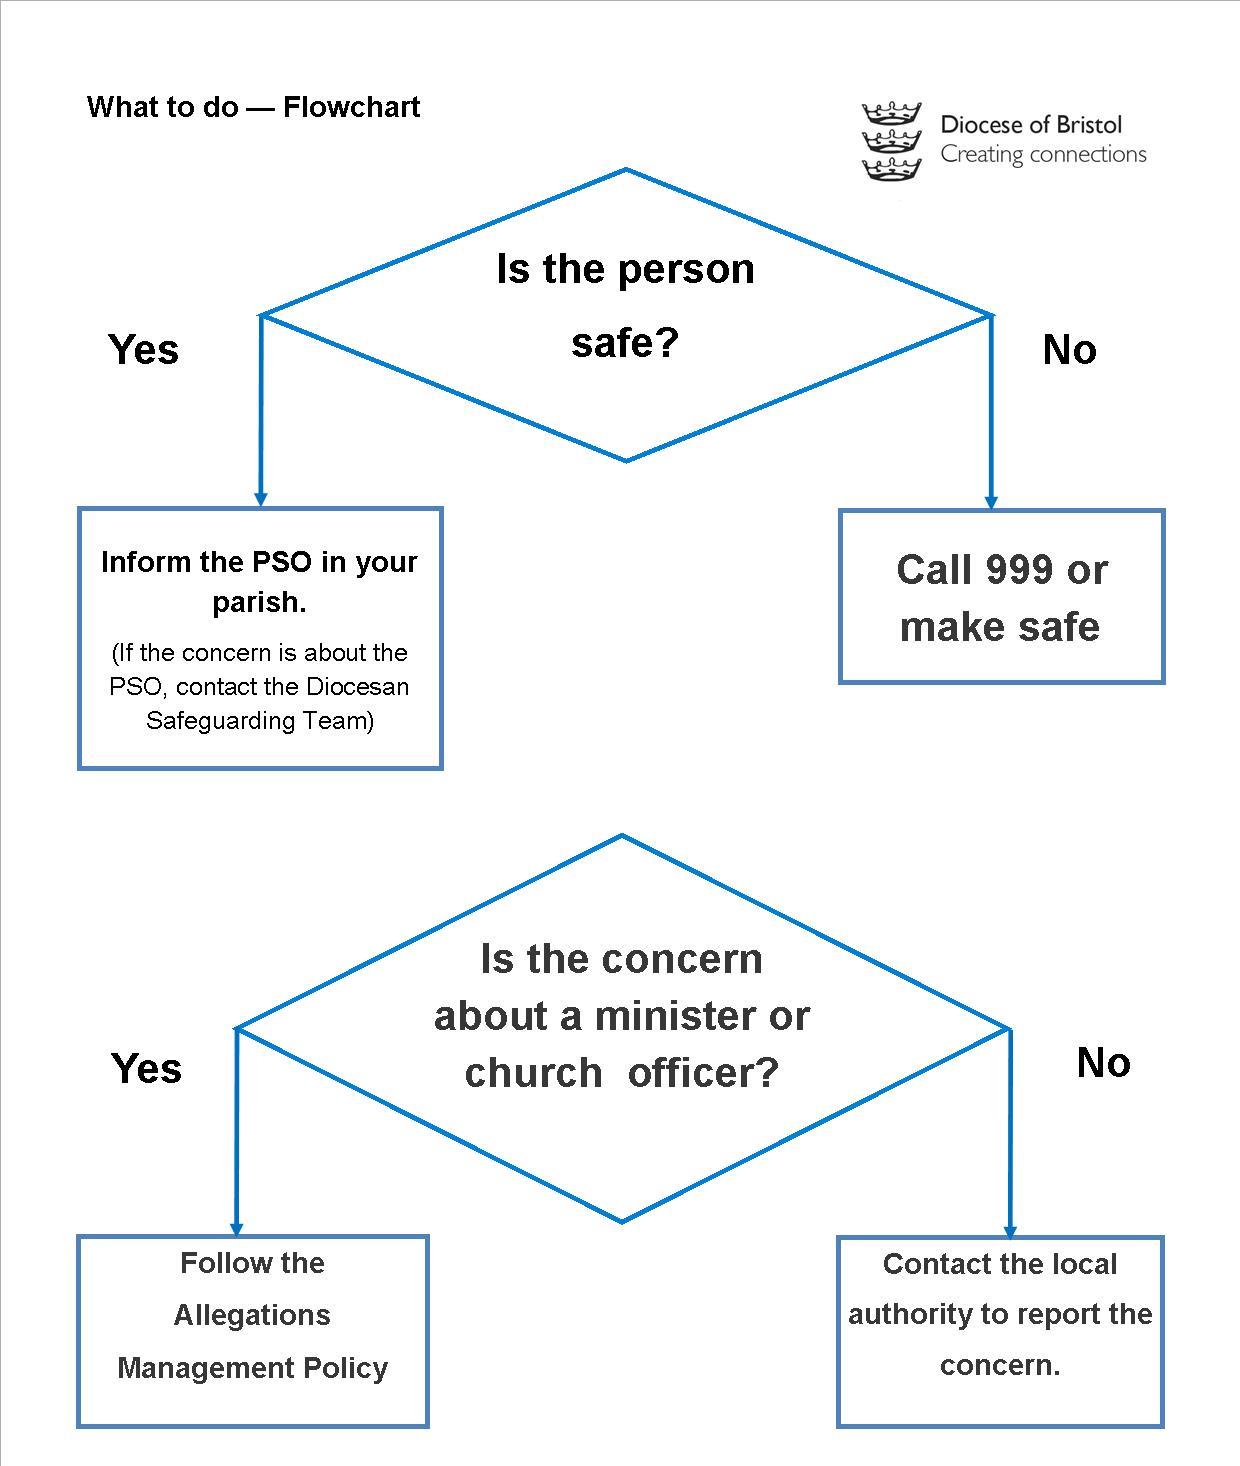 A flowchart describing the process for alerting the relevant authorities to allegations of abuse. 